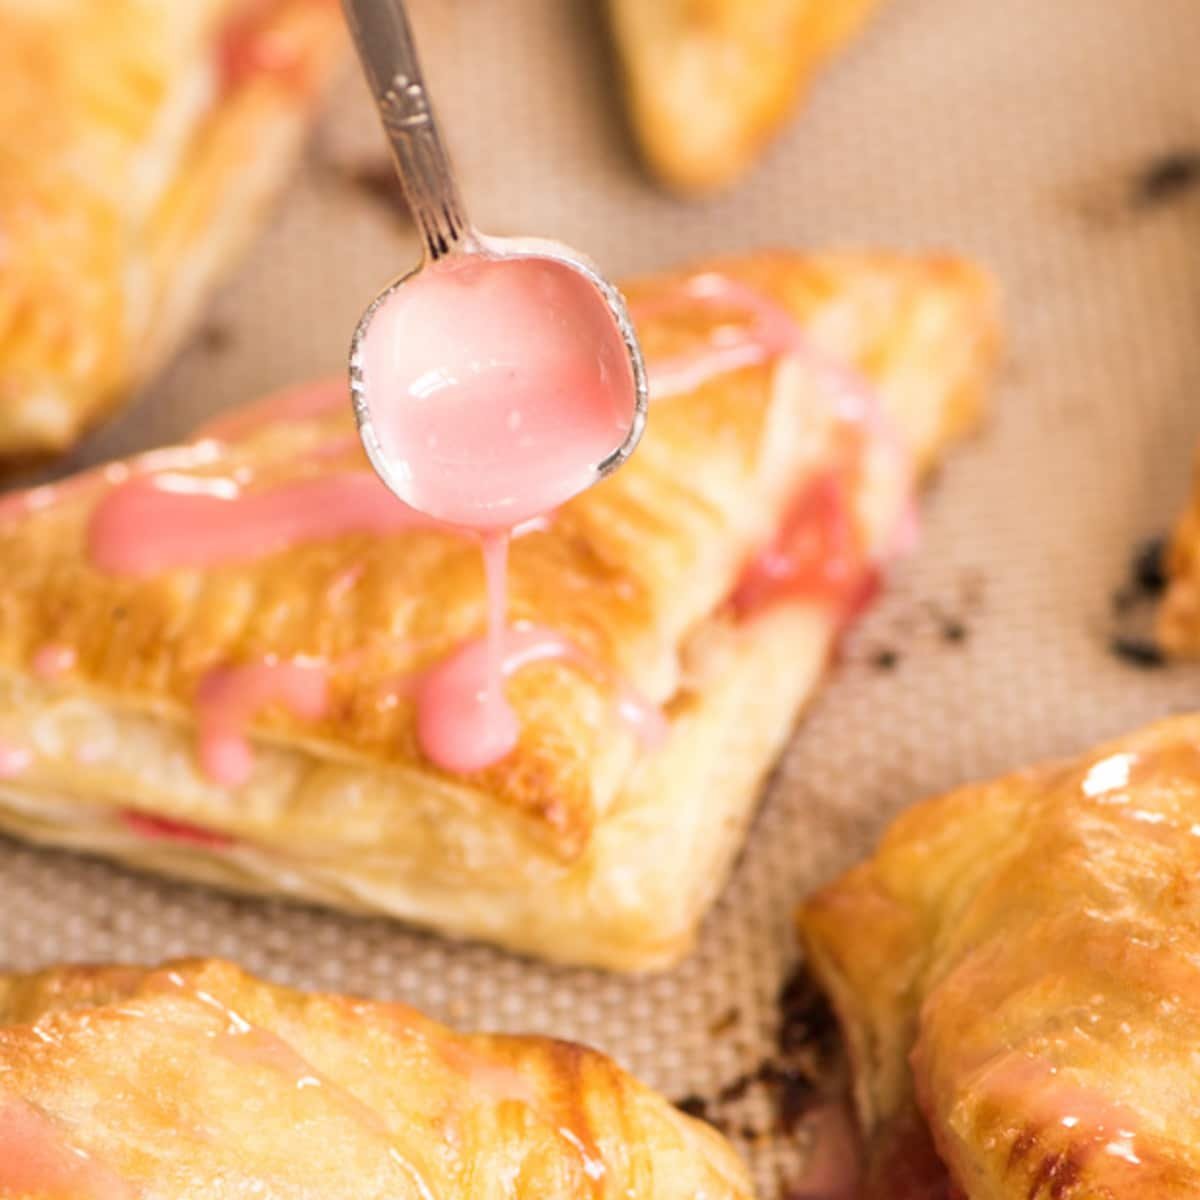 spooning strawberry glaze over puff pastry turnovers